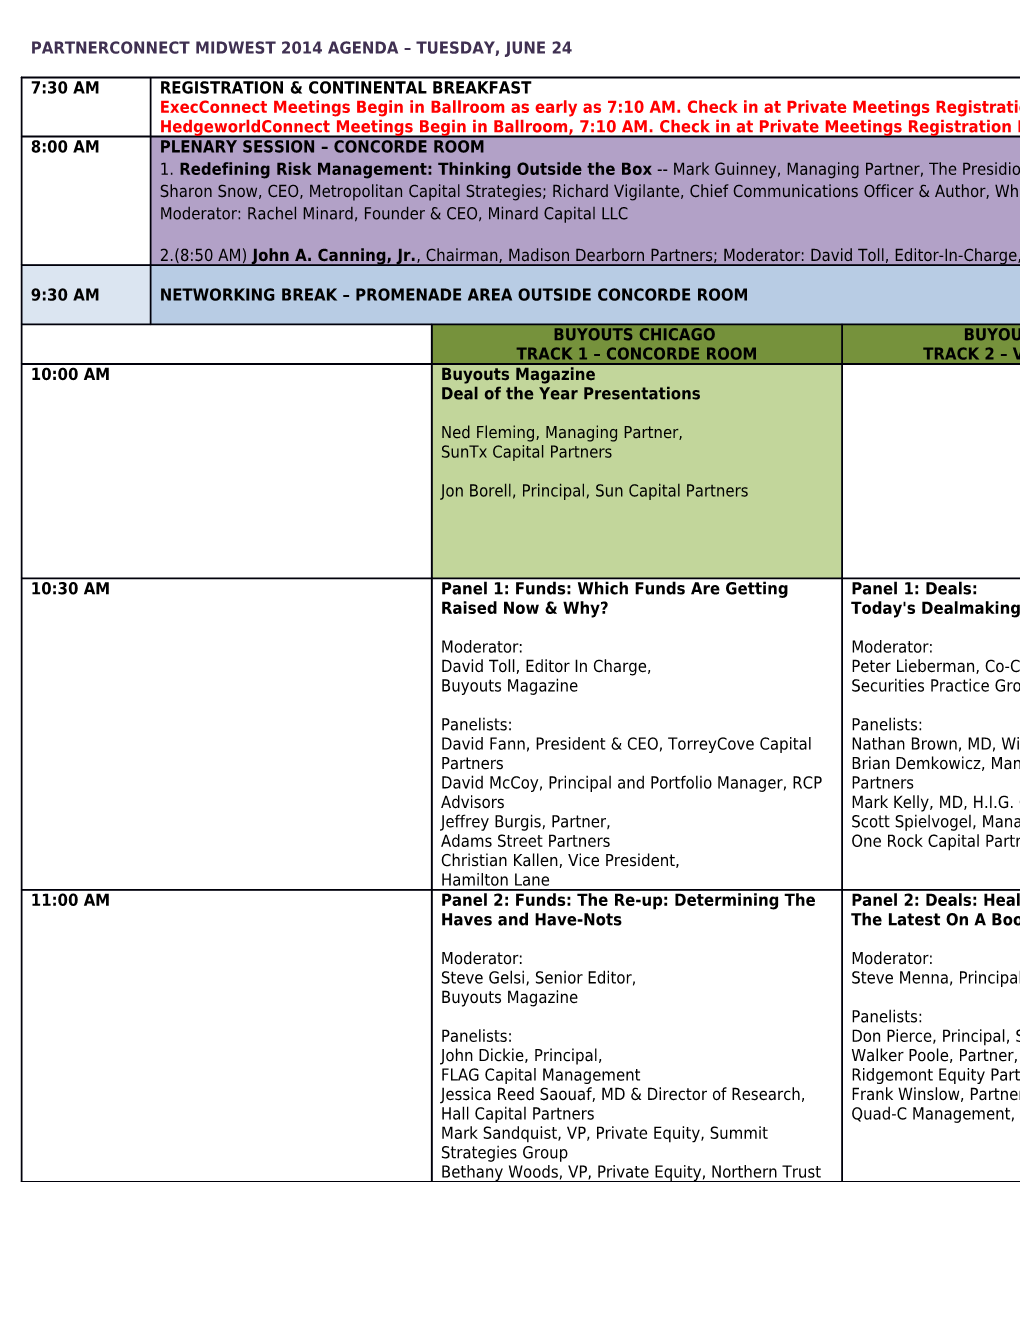 Partnerconnect Midwest 2014 Agenda Tuesday, June 24